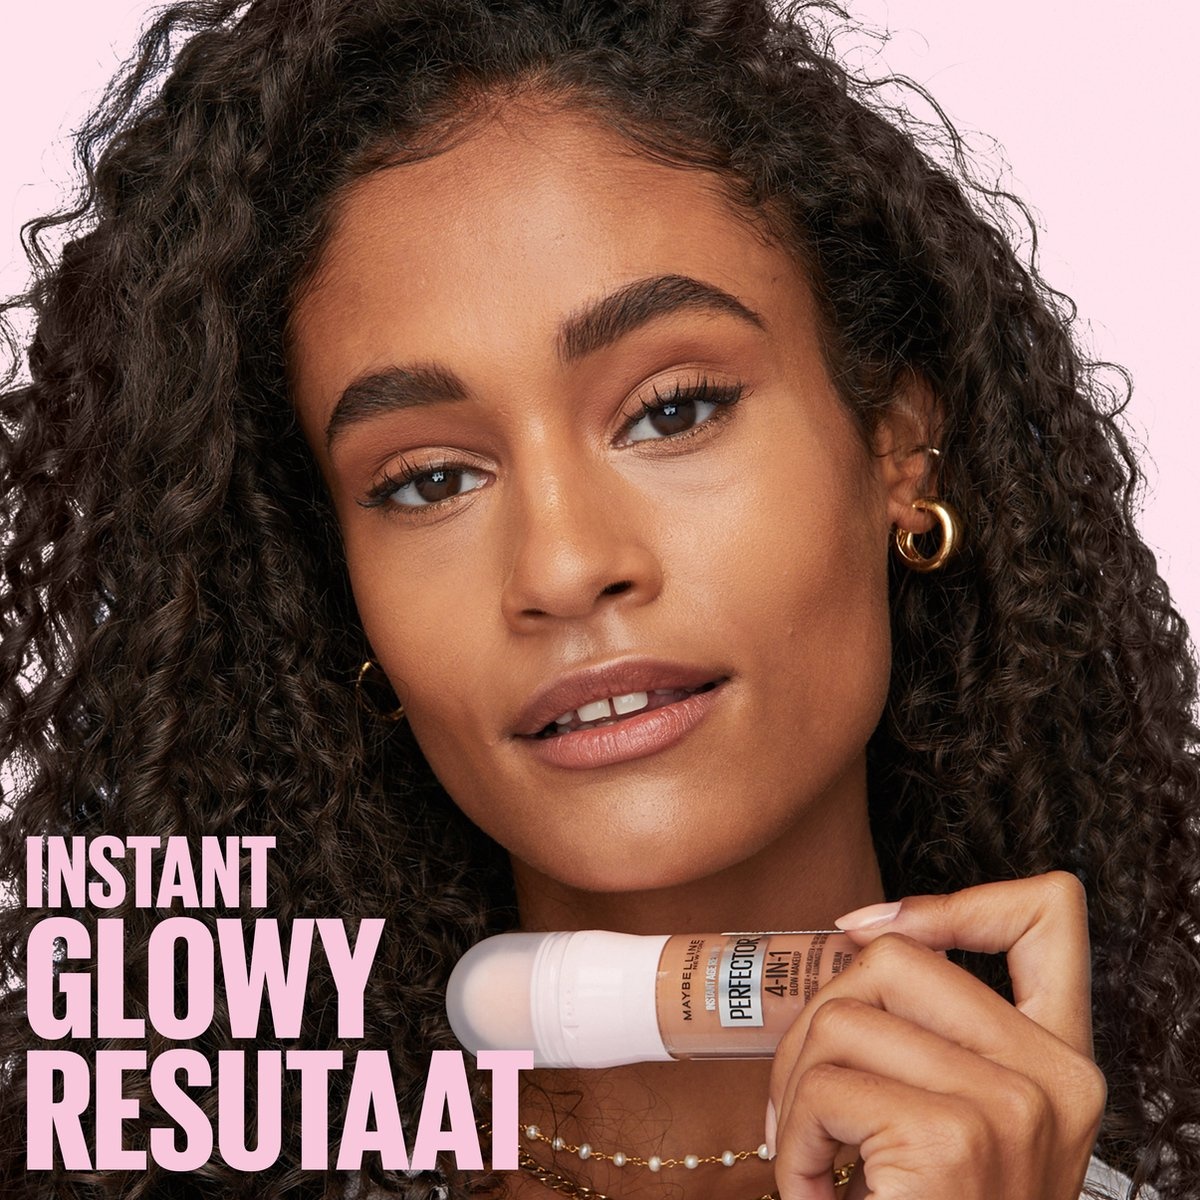 Maybelline Instant Anti-Age Perfector 4-in-1 Glow Medium Deep - Primer, Concealer, Highlighter and BB Cream in 1 - 20 ml